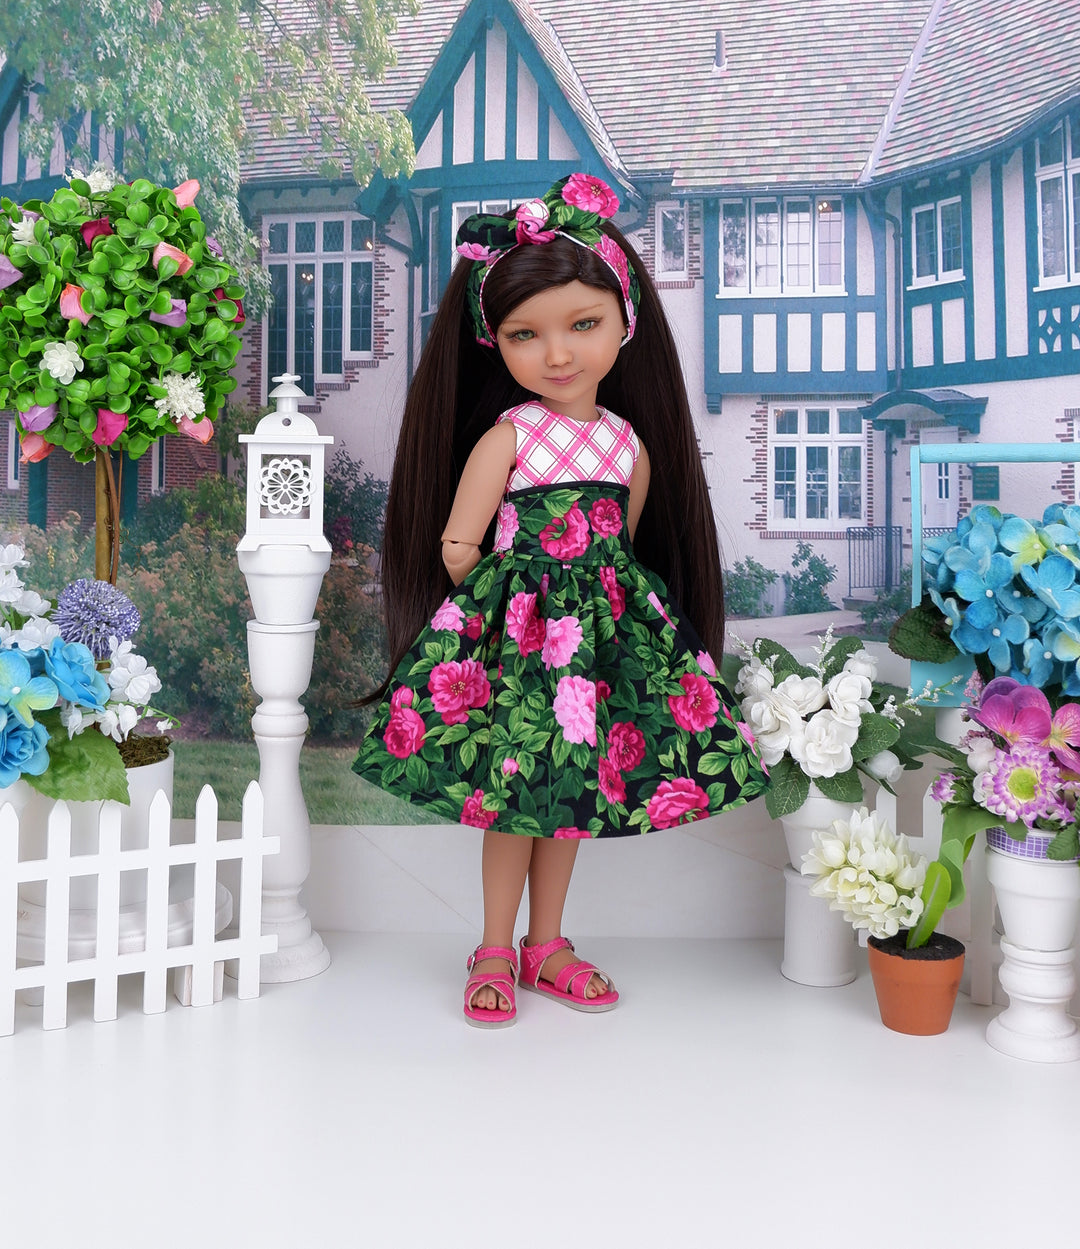 Summer Carnation - dress and sandals for Ruby Red Fashion Friends doll